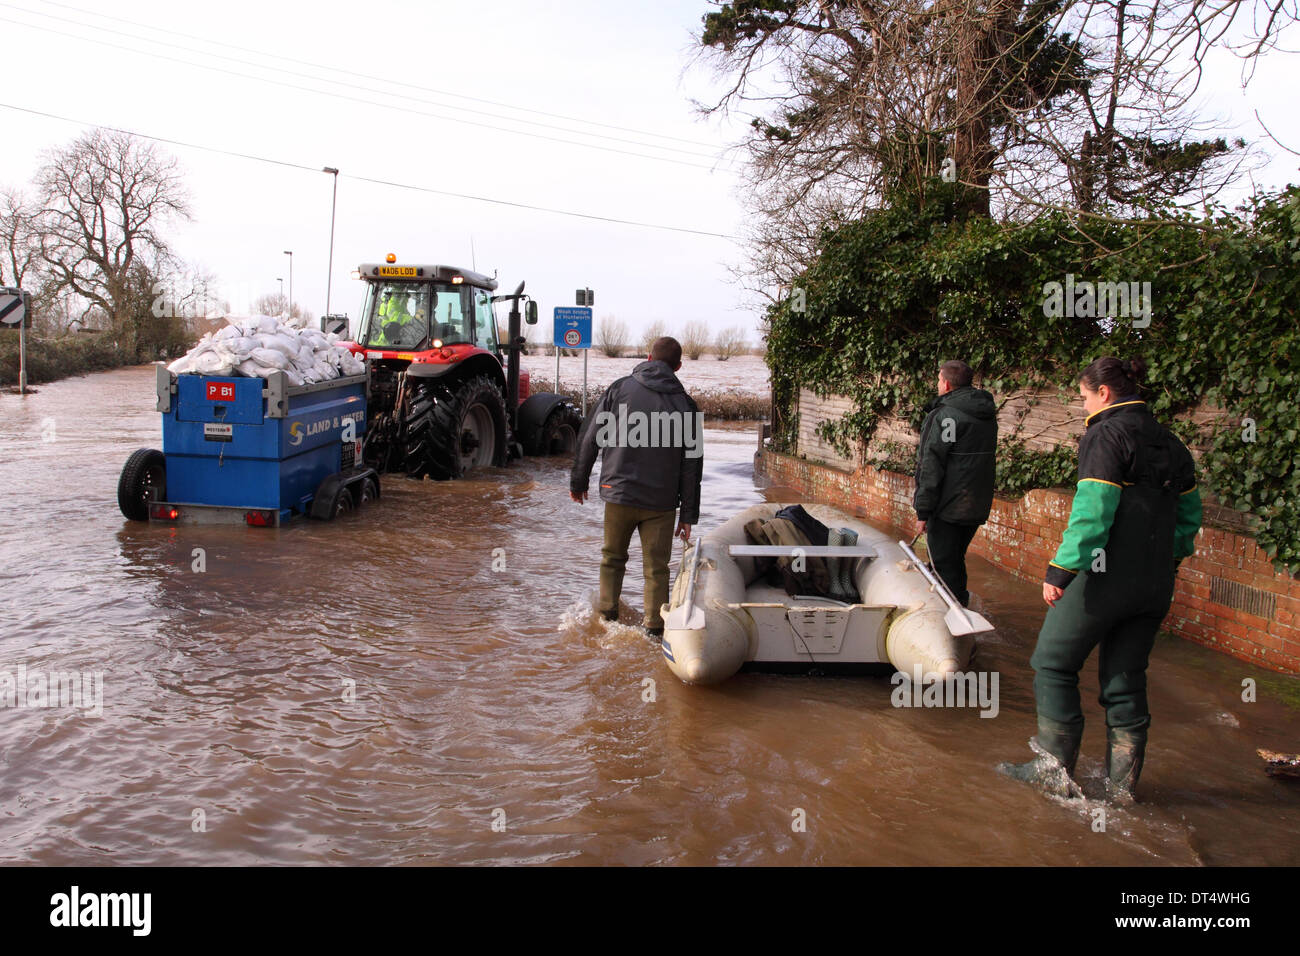 Burrowbridge, Somerset, UK. 9th Feb 2014. Tractor with a trailer full of sandbags drives through flood water on the A361 at Burrowbridge with volunteers following by boat. Stock Photo